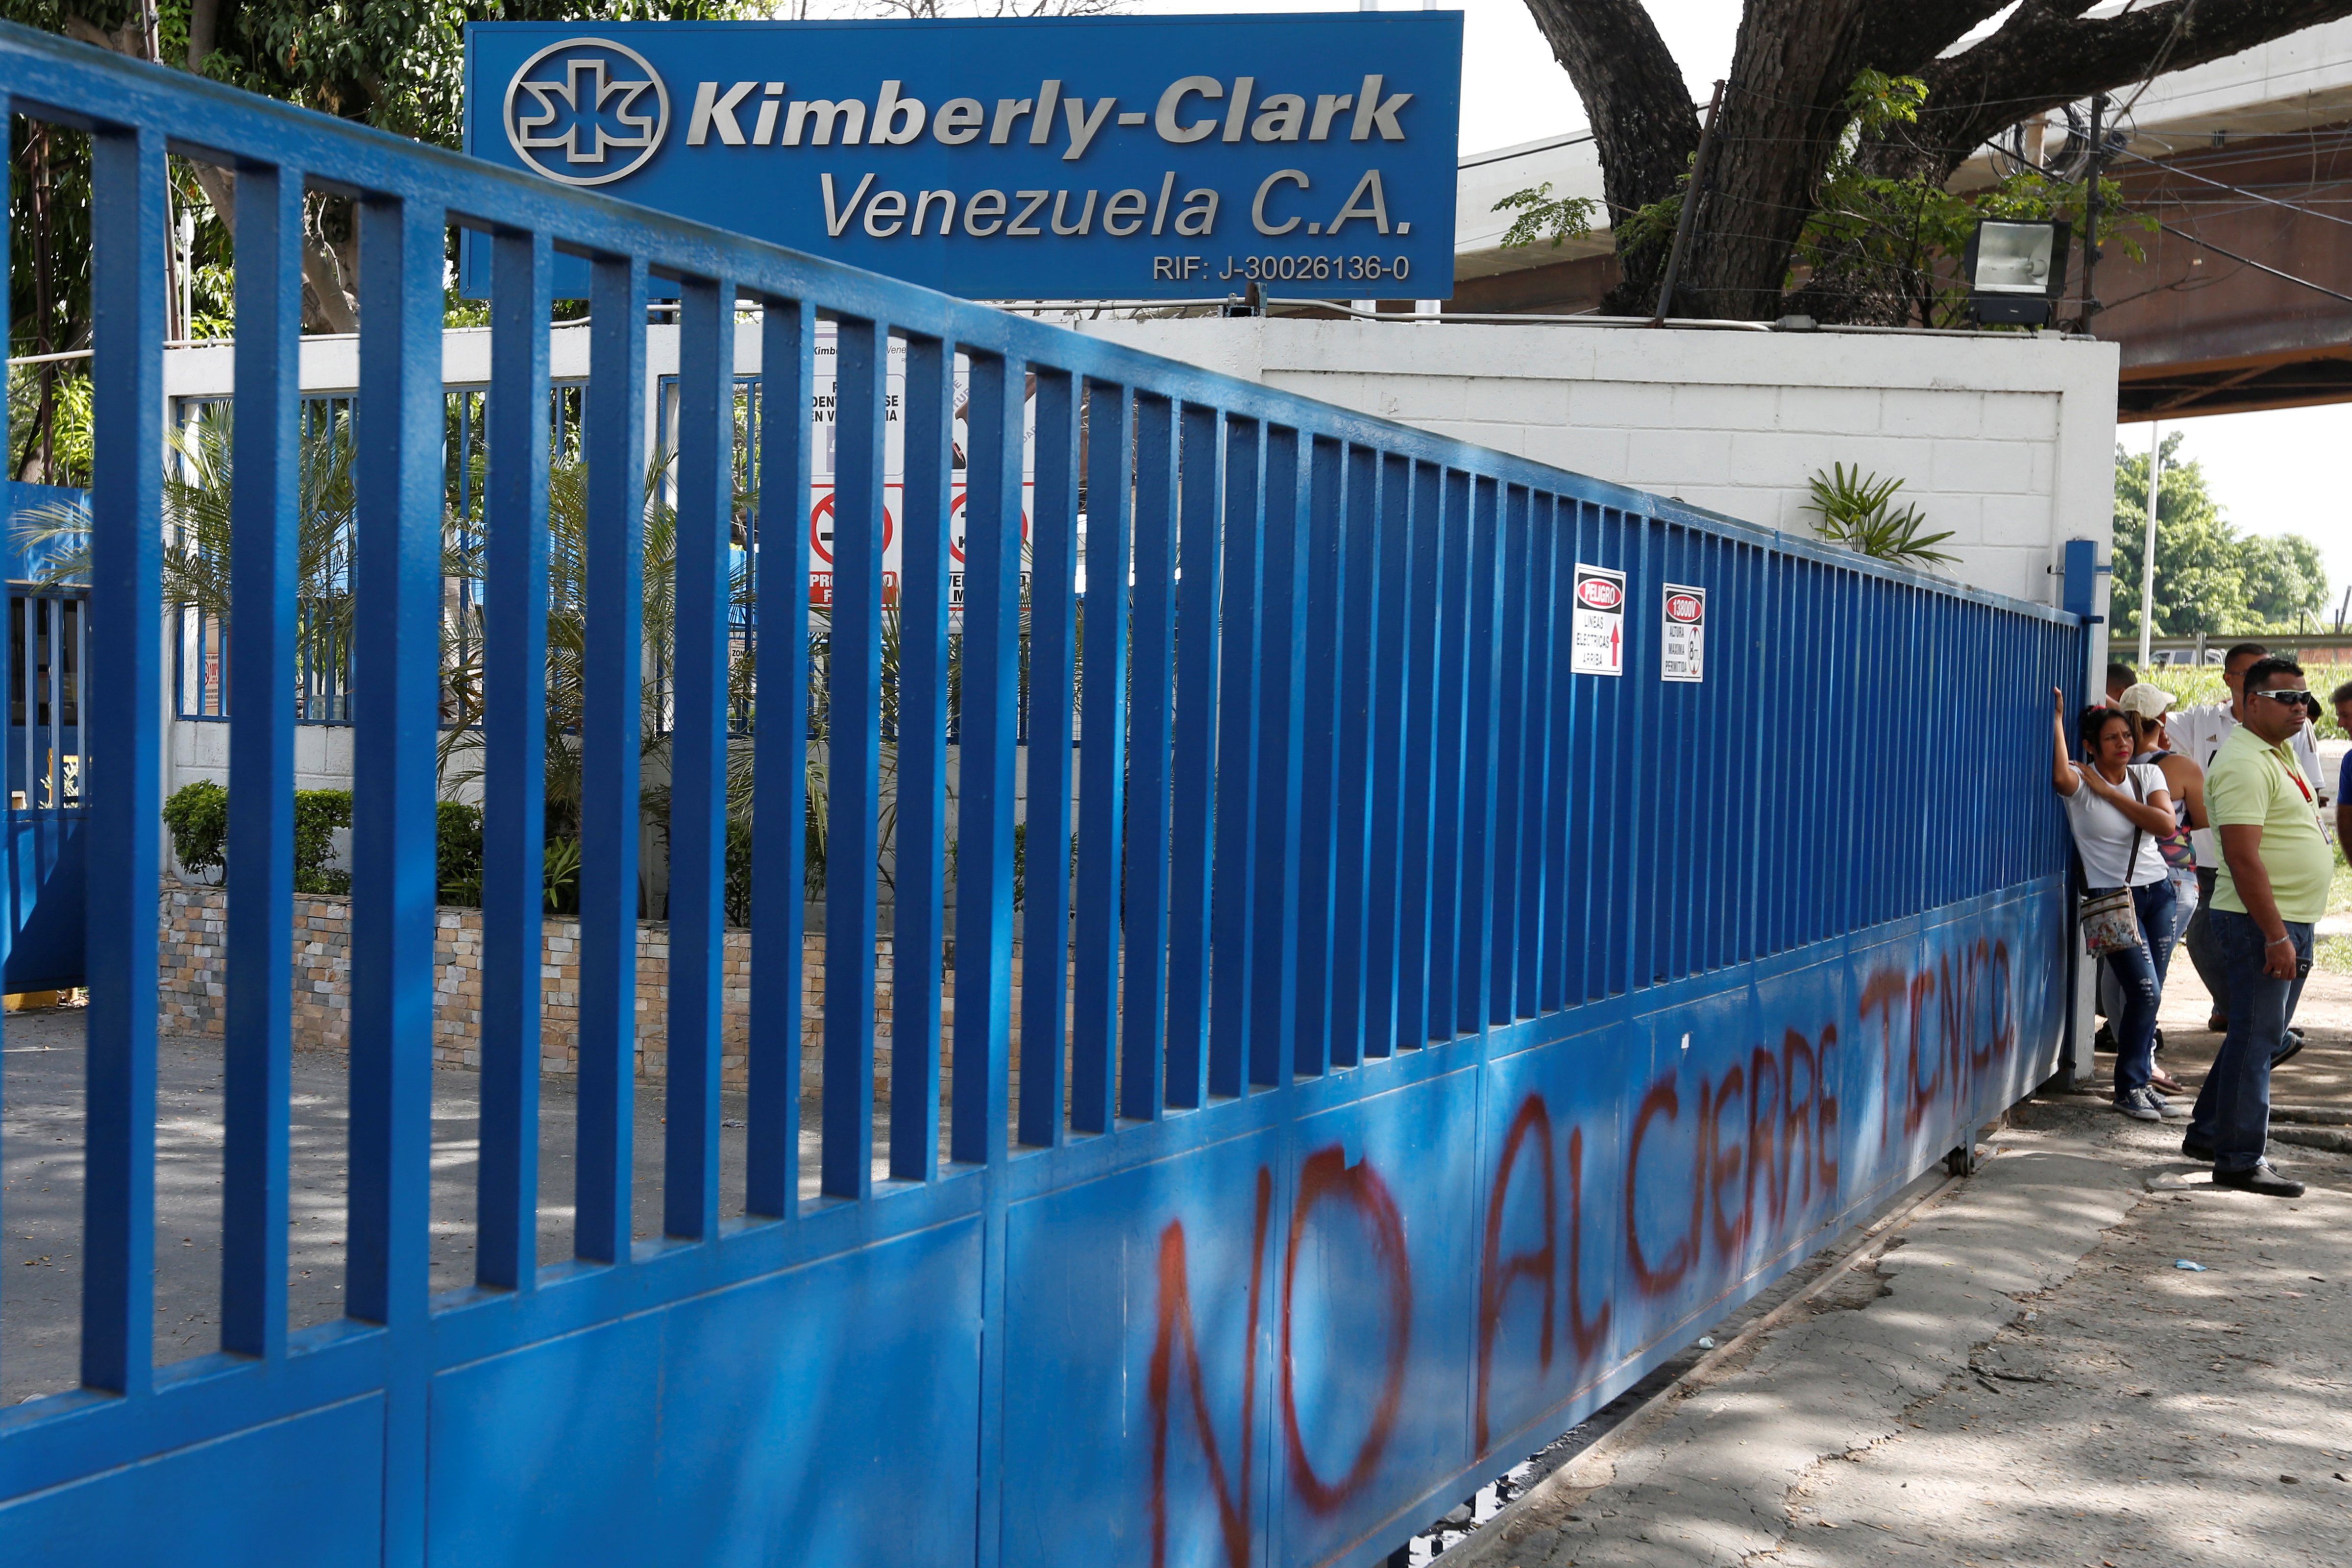 Employees stand outside Kimberly-Clark in Maracay